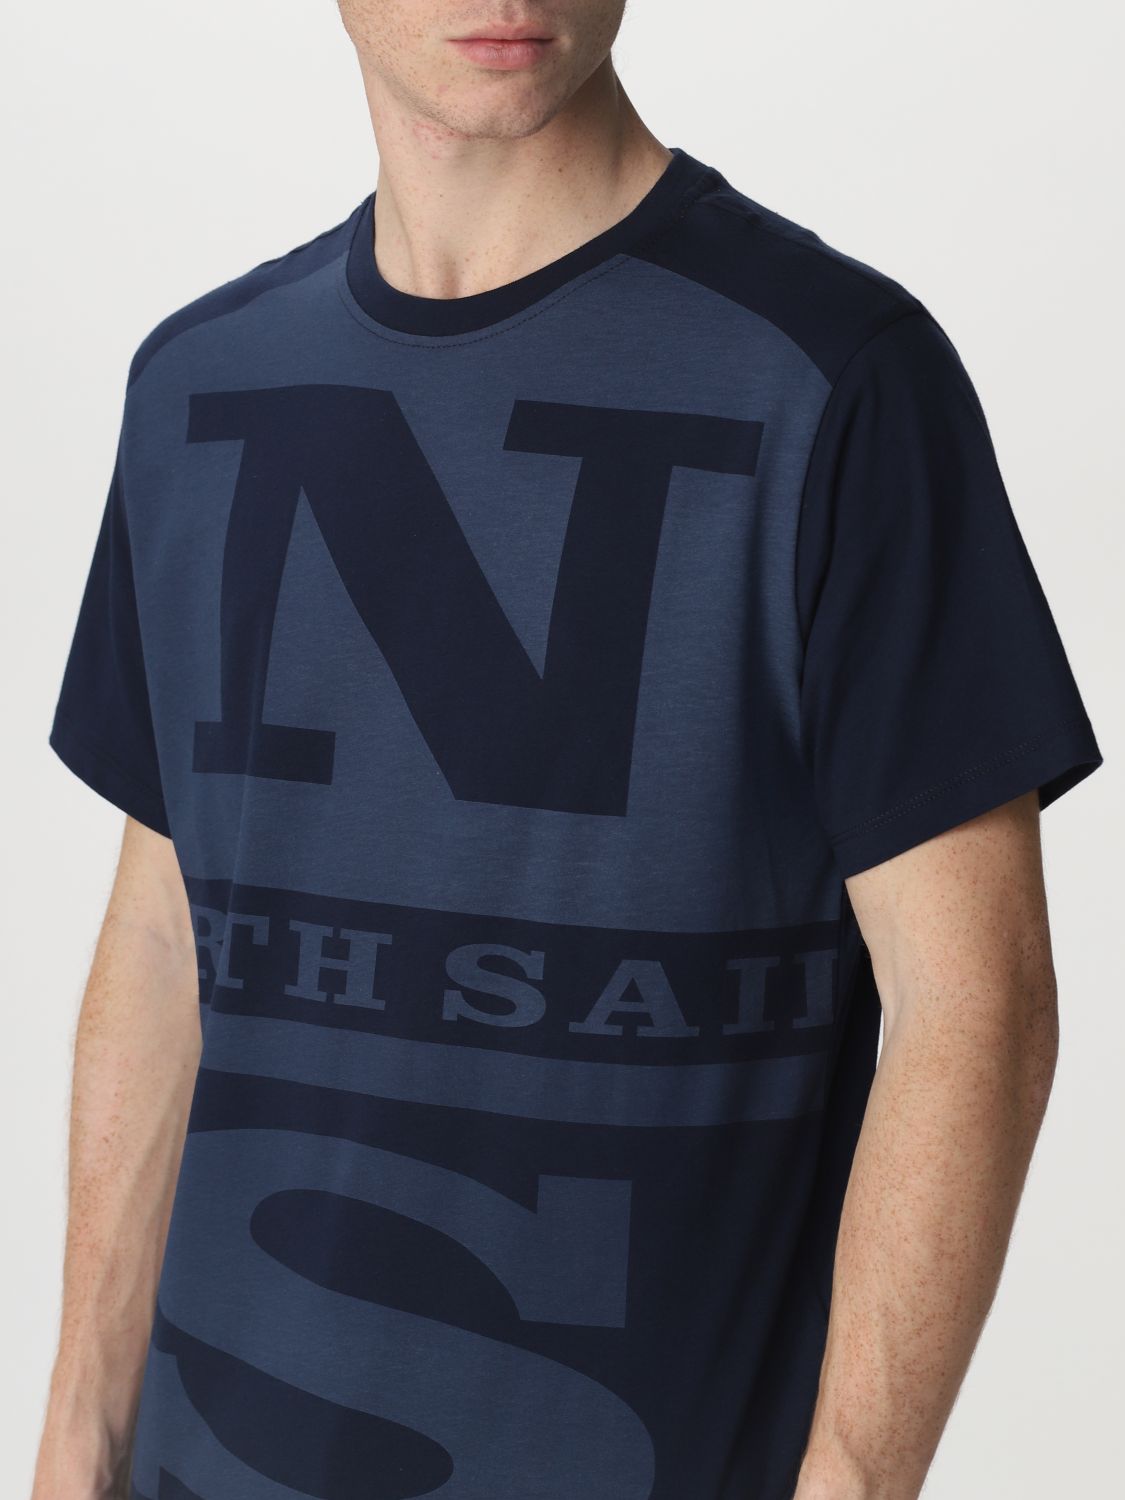 North Sails Outlet: cotton T-shirt with maxi logo - Navy | North Sails ...